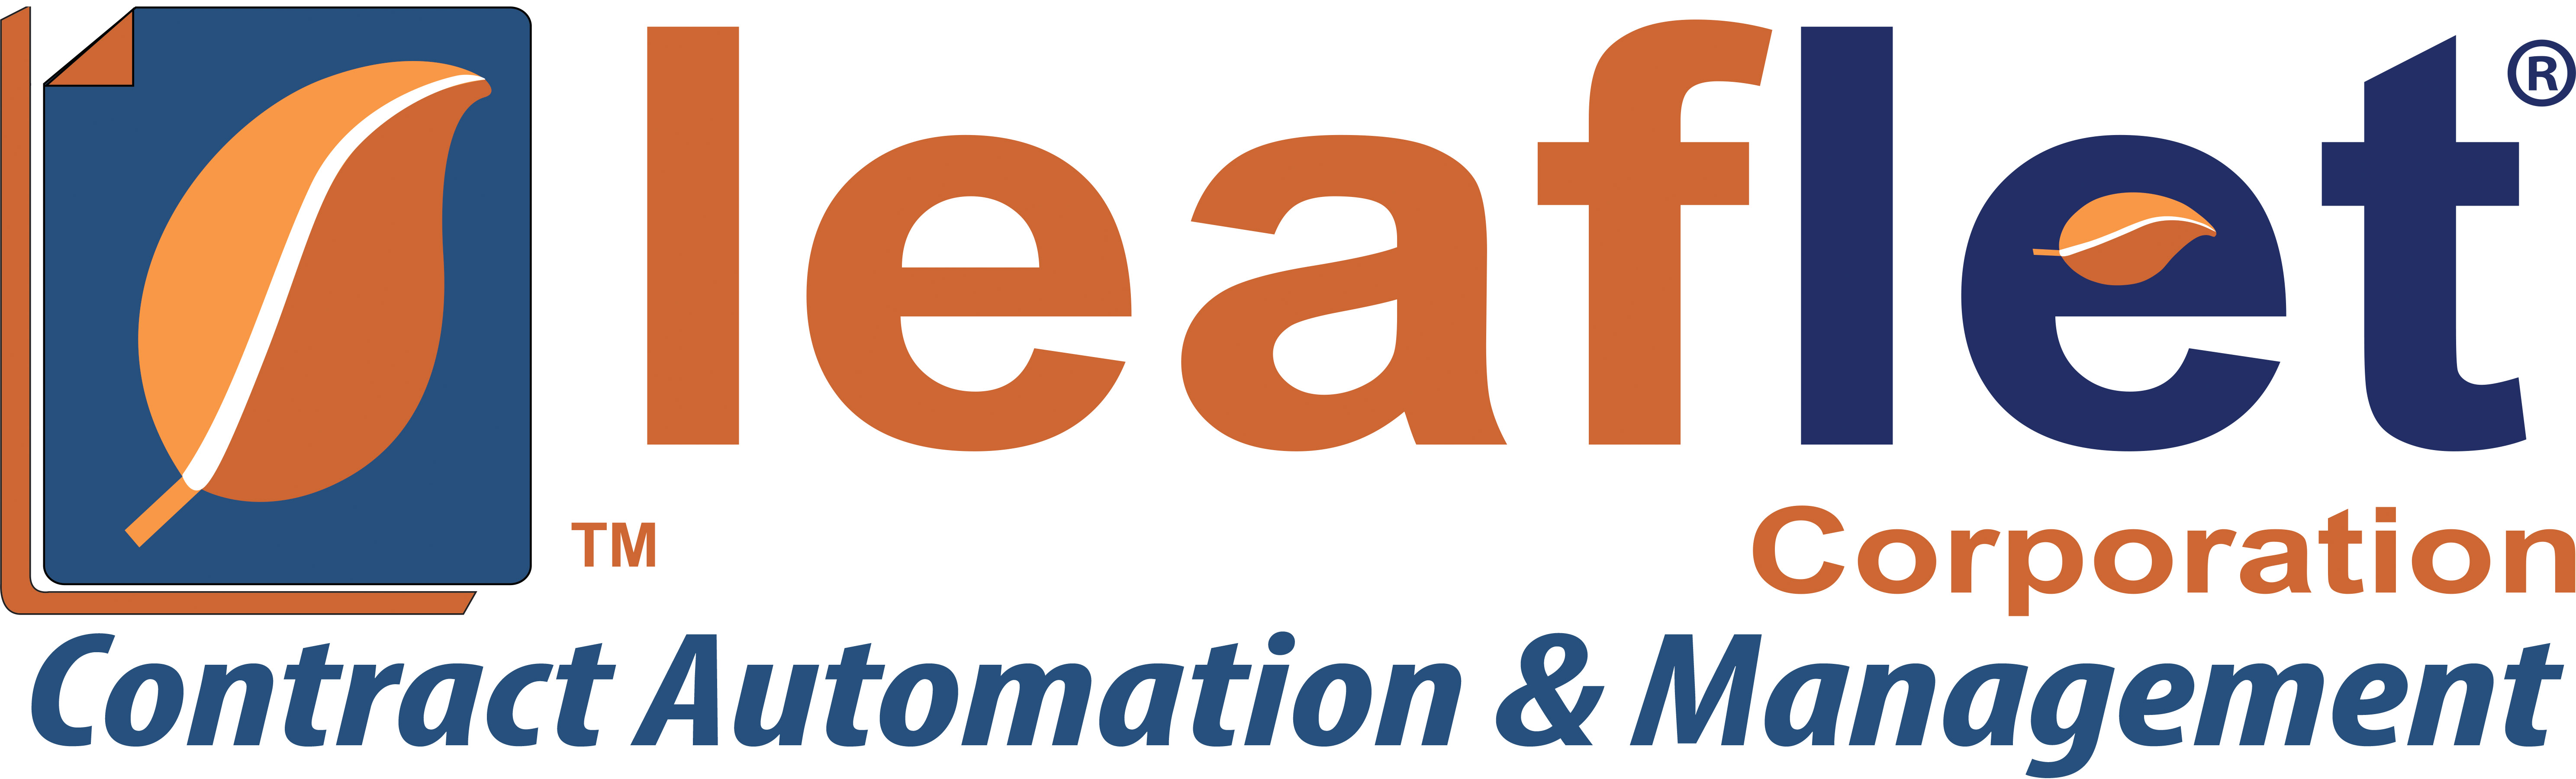 Leaflet Corporation: Providers of the Leaflet Contract Automation and Management Platform